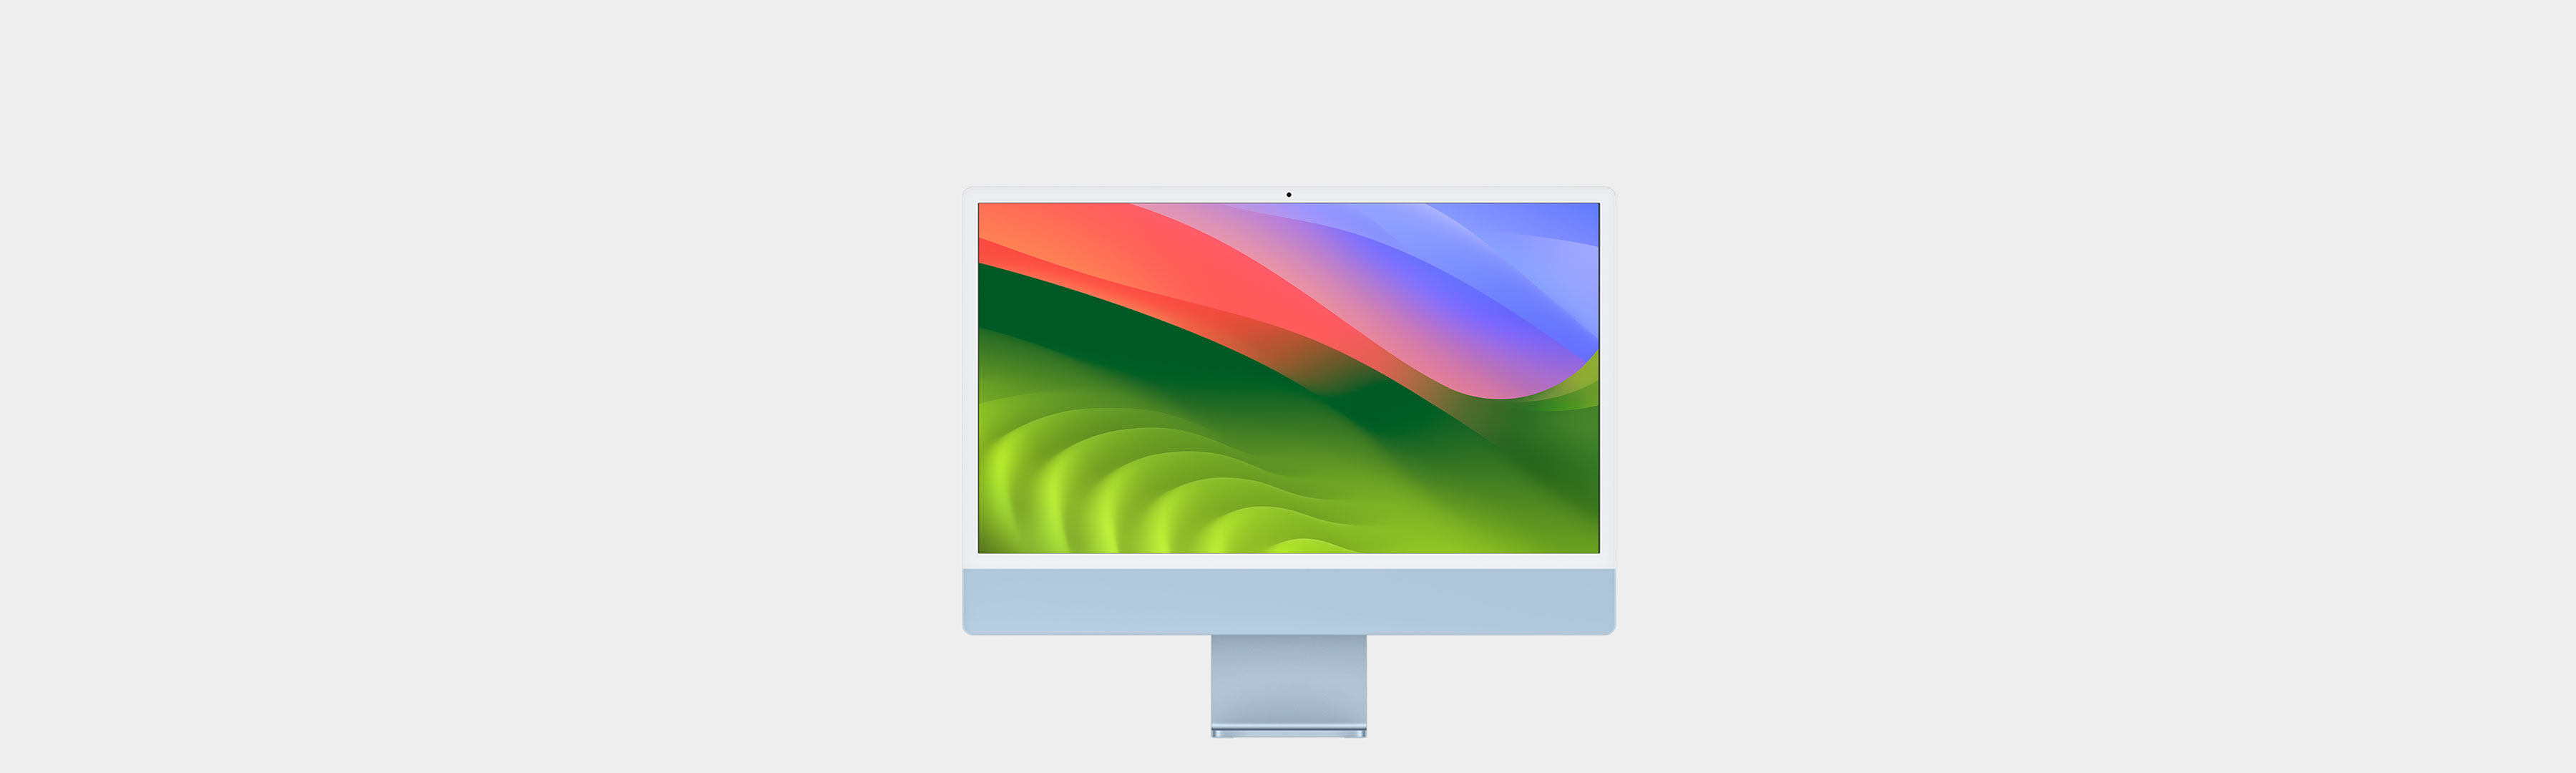 iMac - Official Apple Support